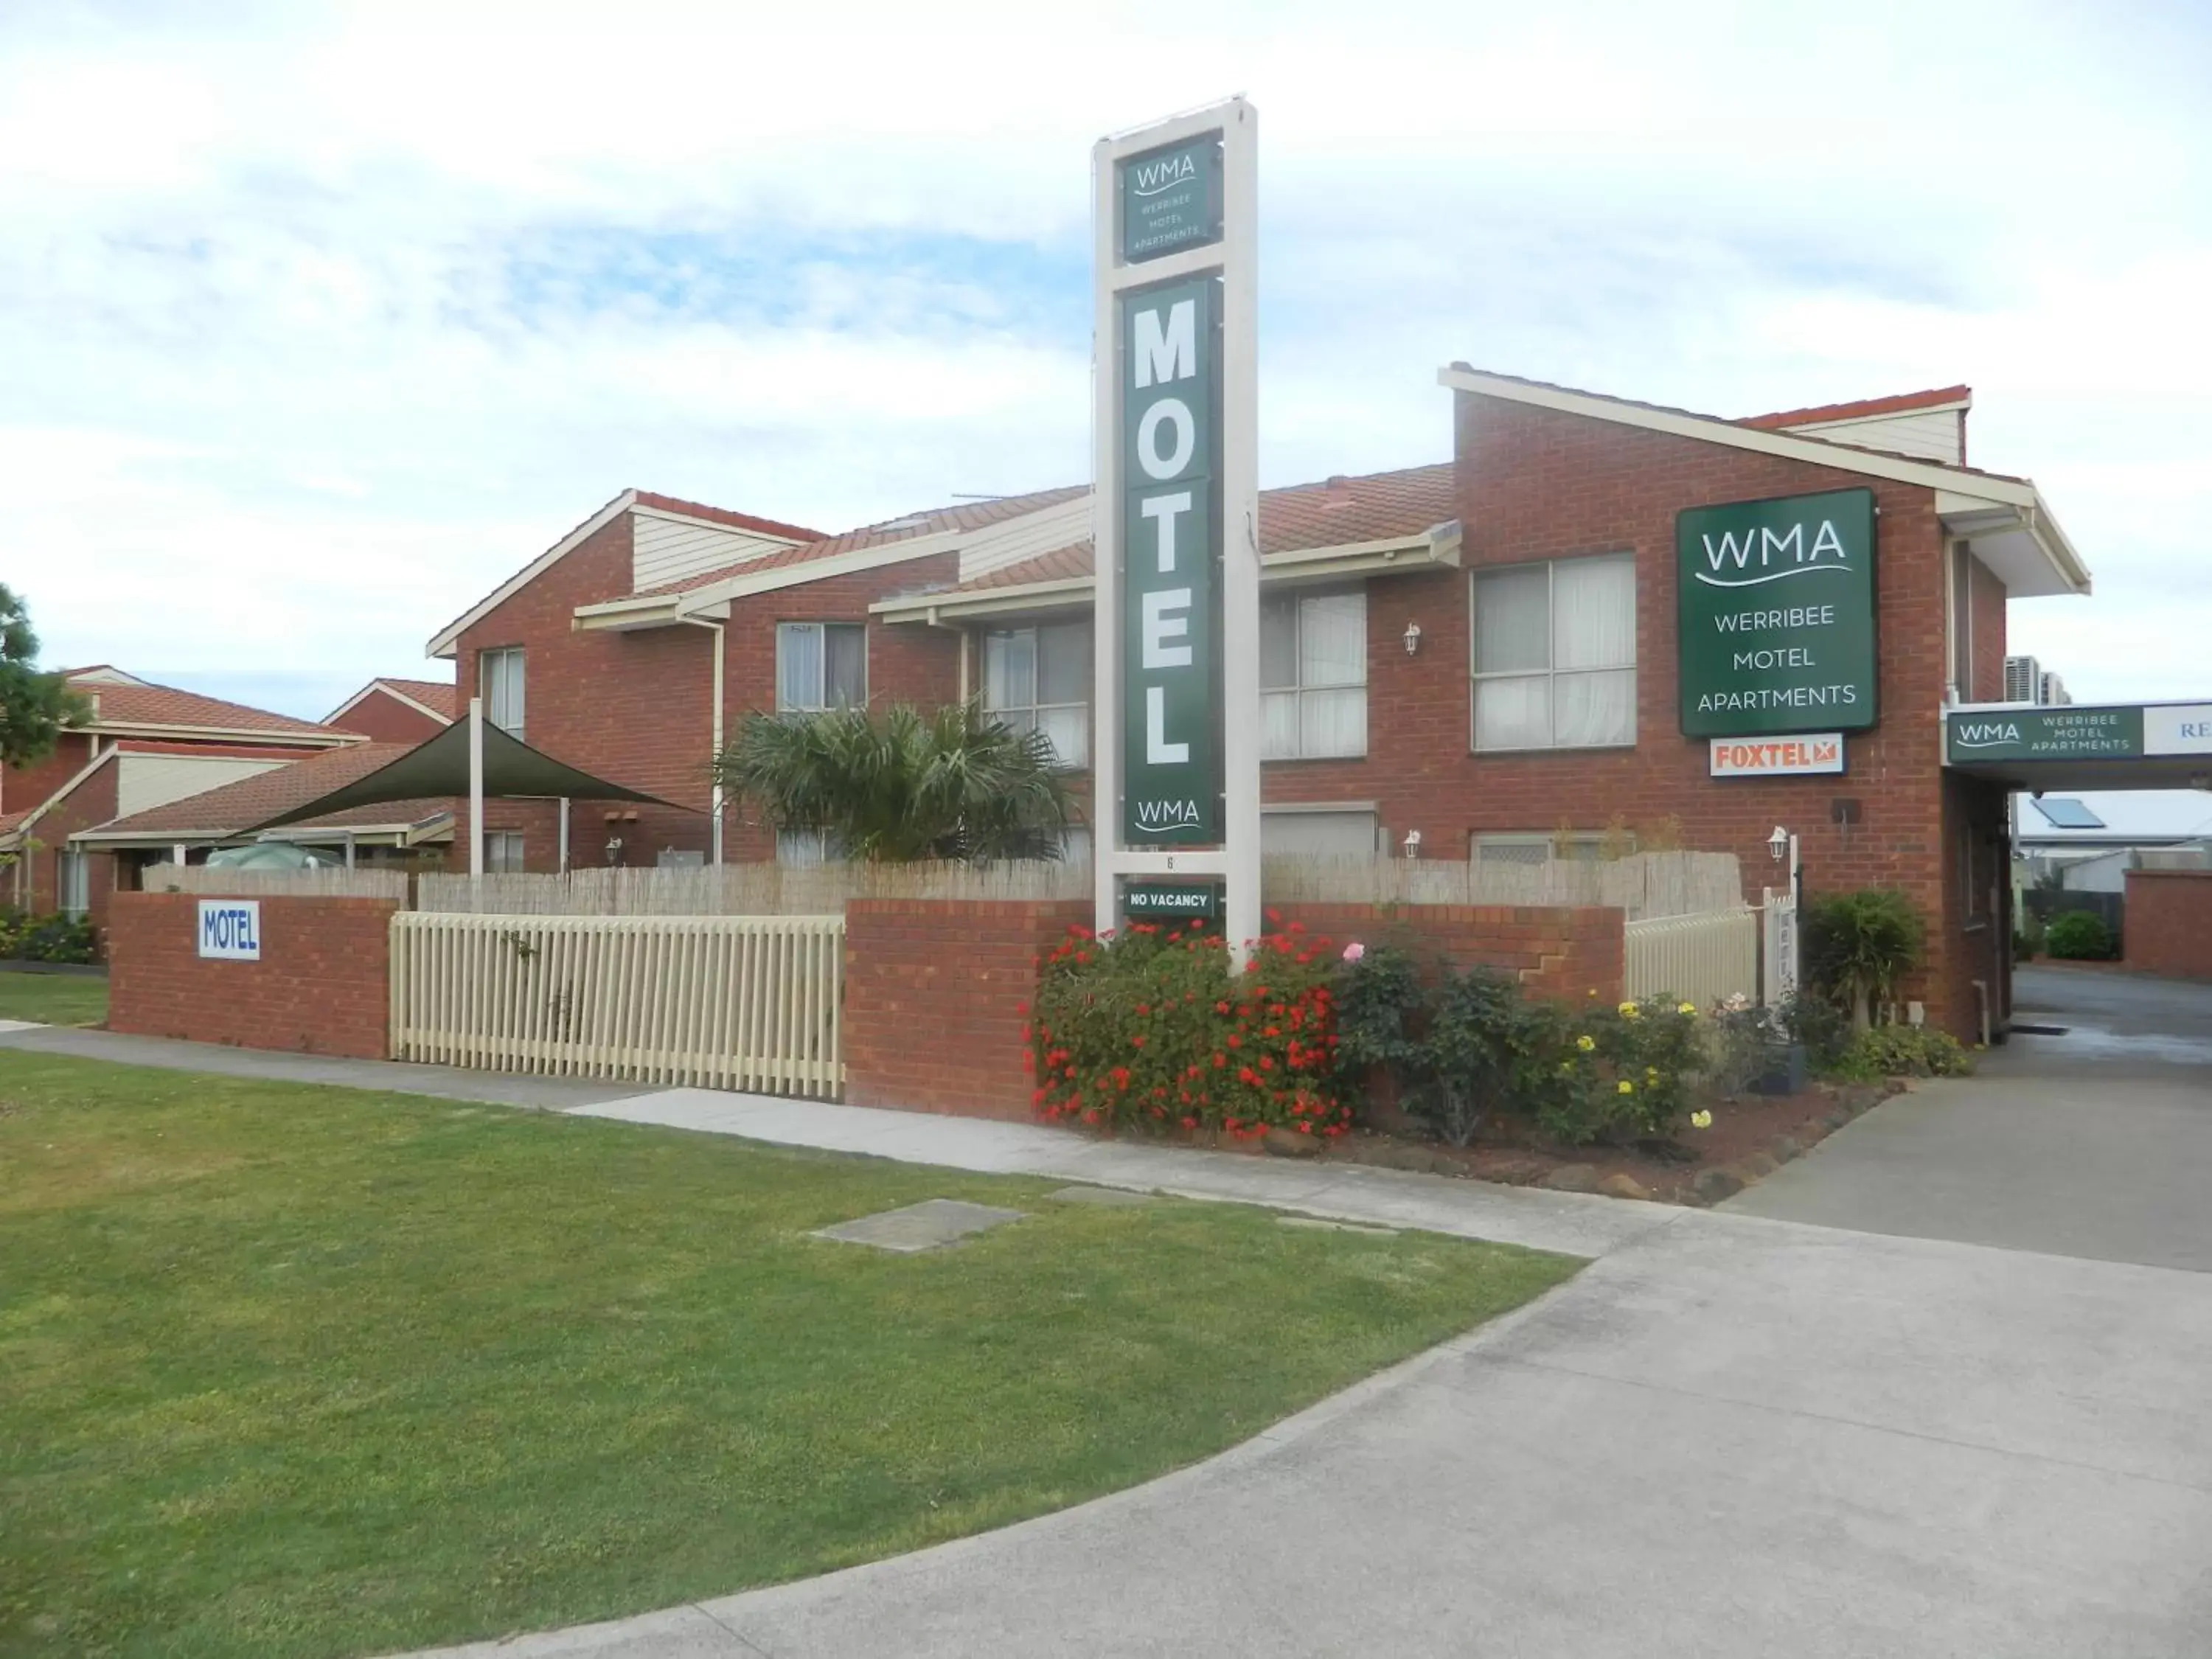 Property Building in Werribee Motel and Apartments